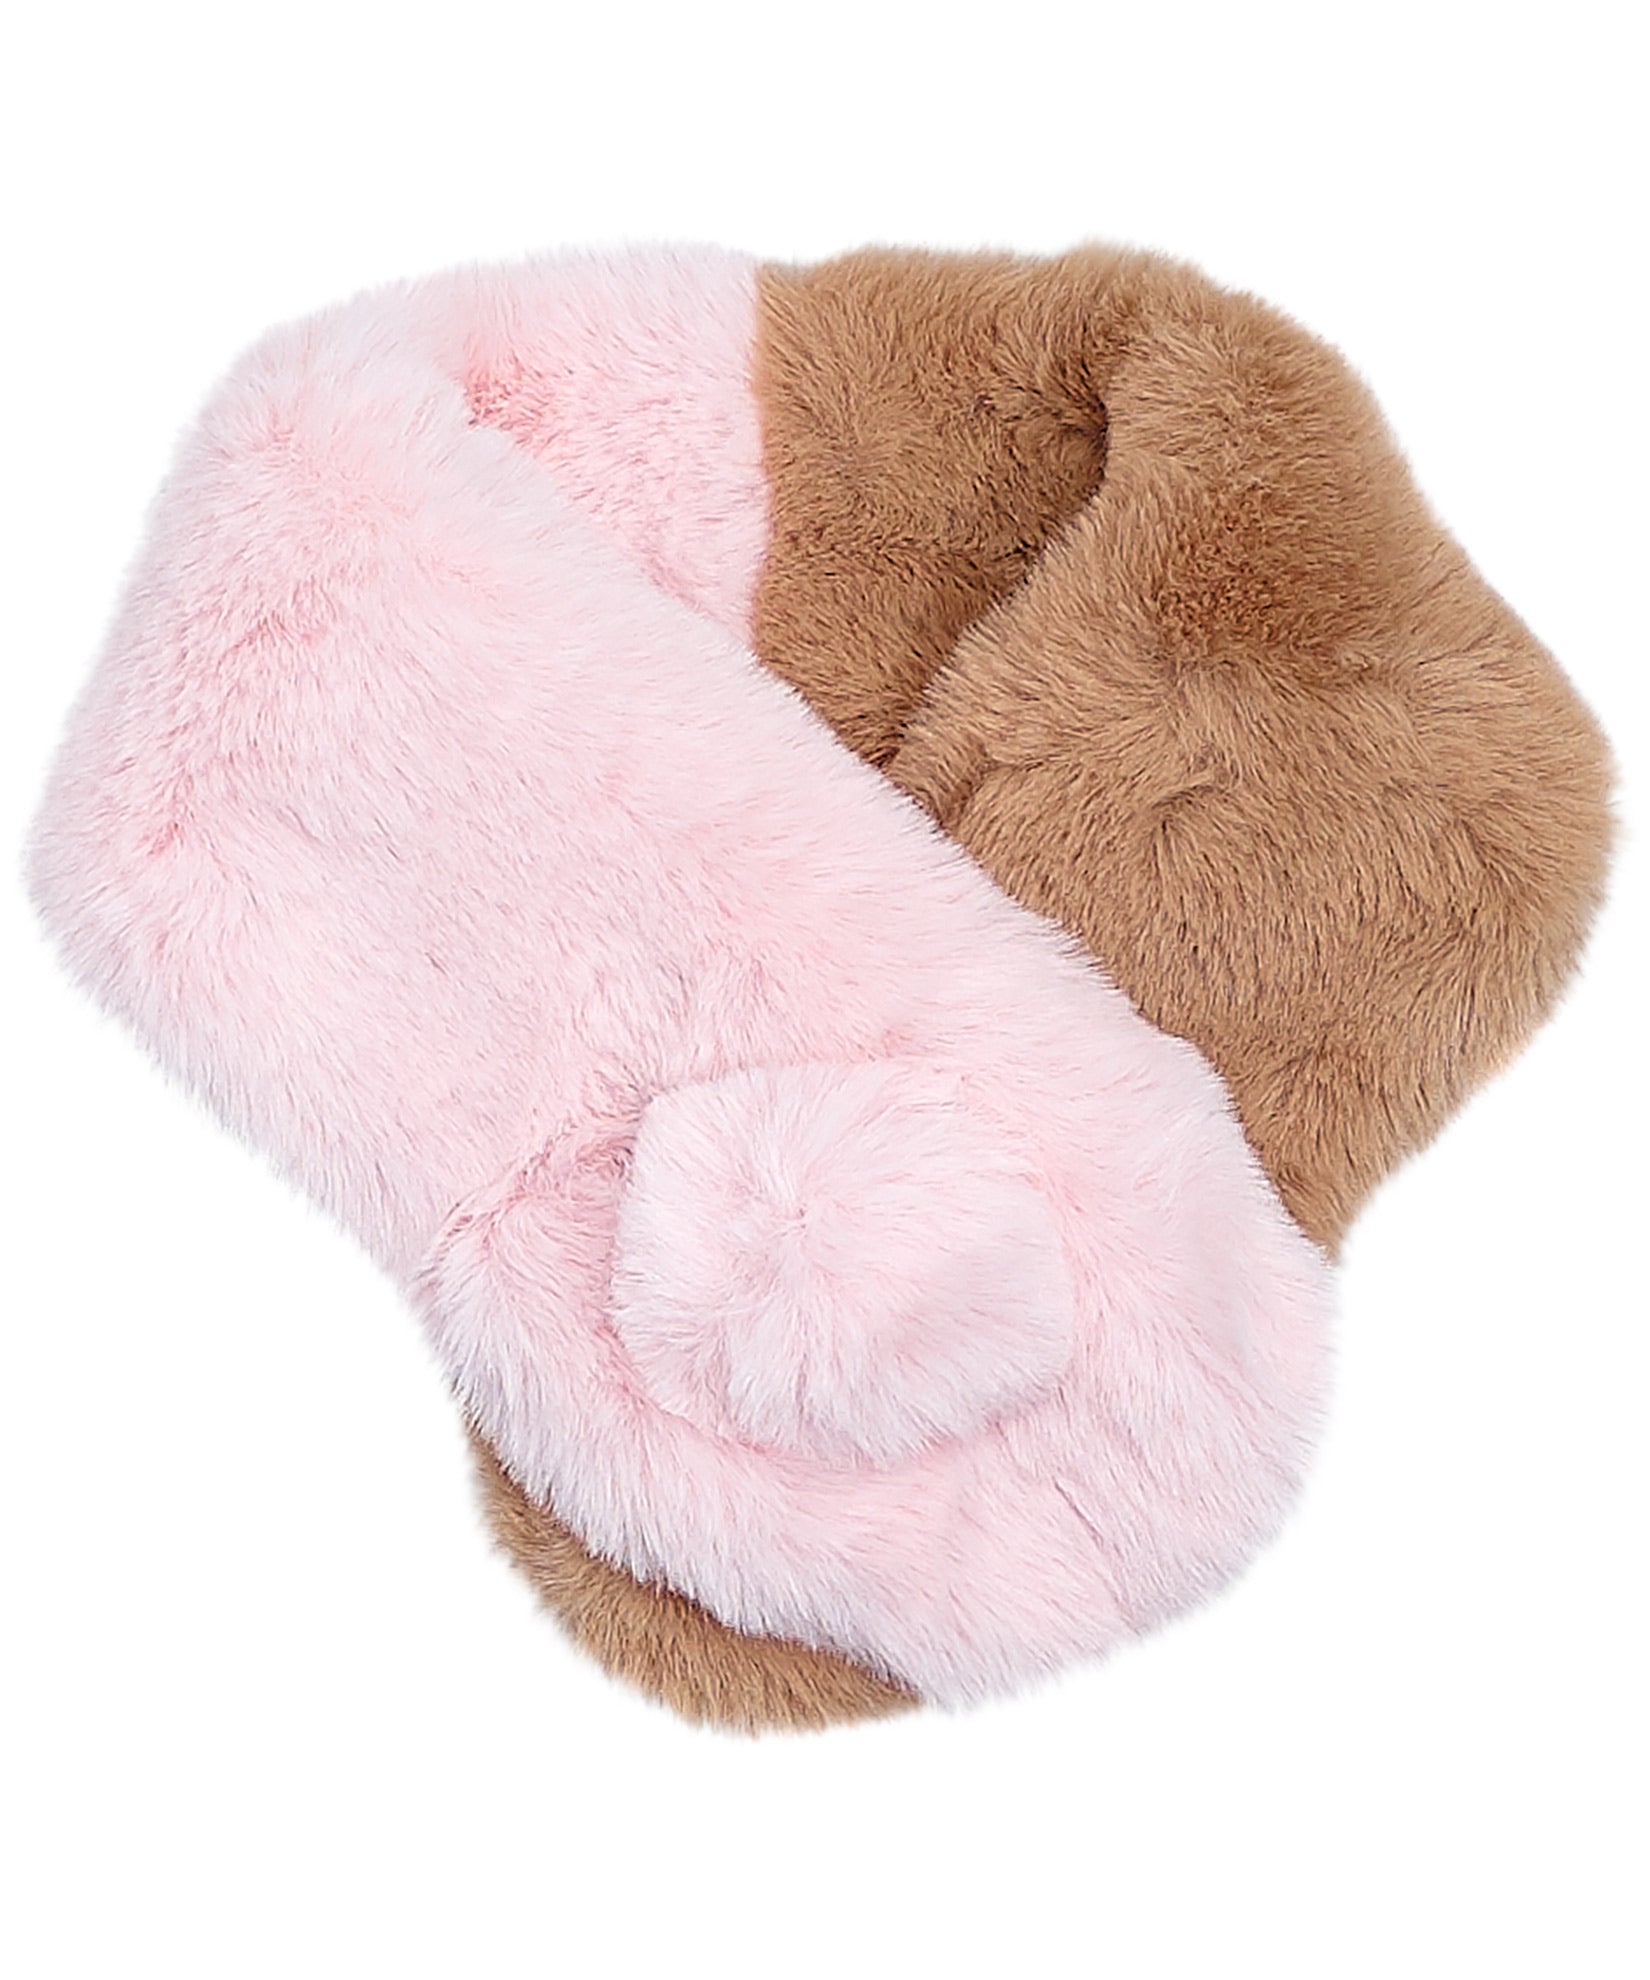 Neck Warmer Pull-through With Pom in color Blush